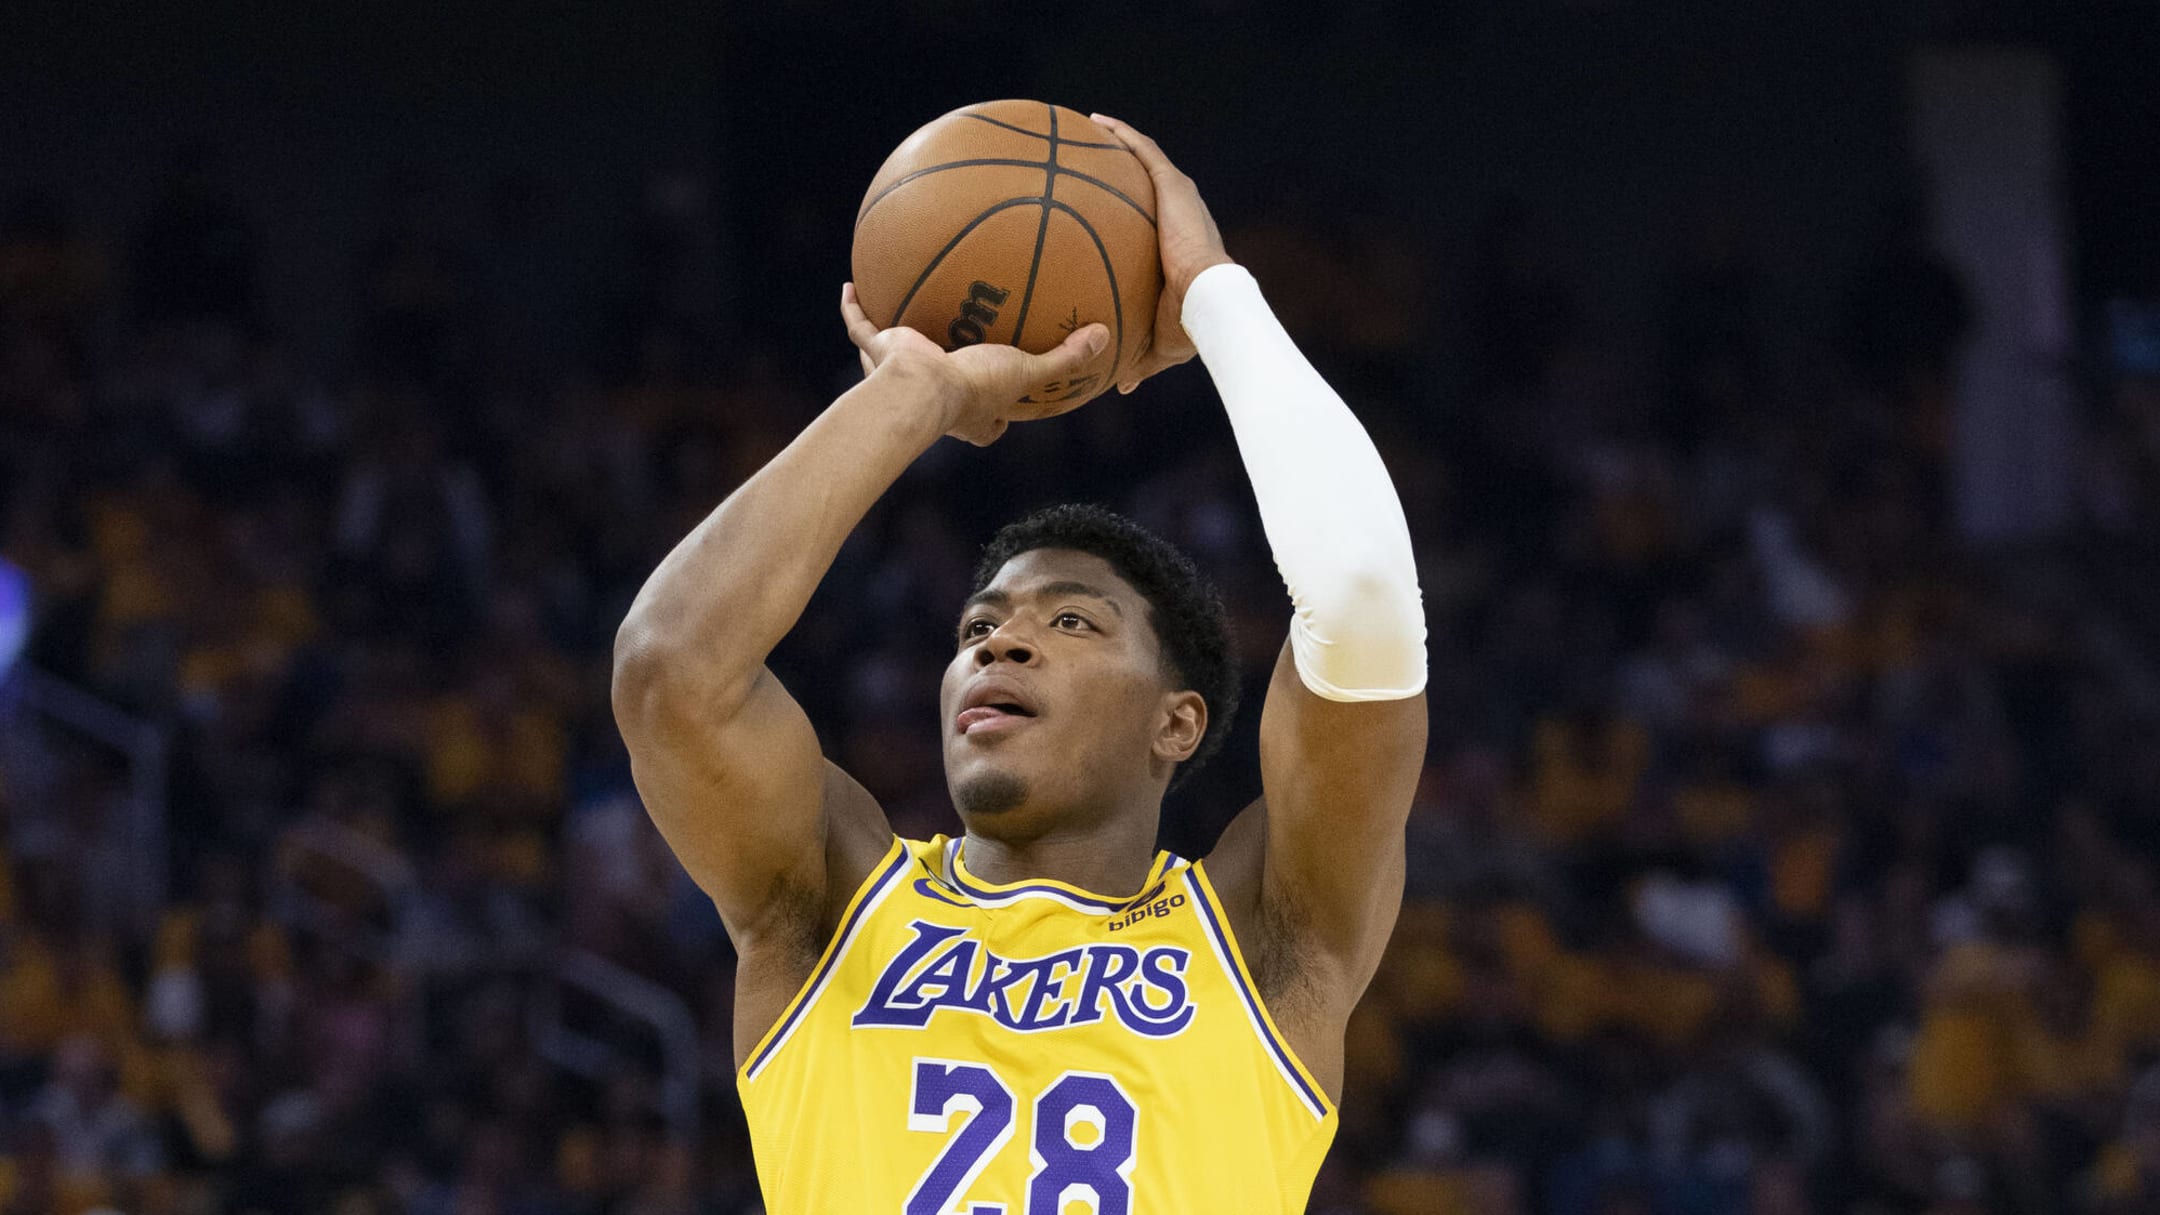 Former Gonzaga forward Rui Hachimura staying with Lakers on 3-year